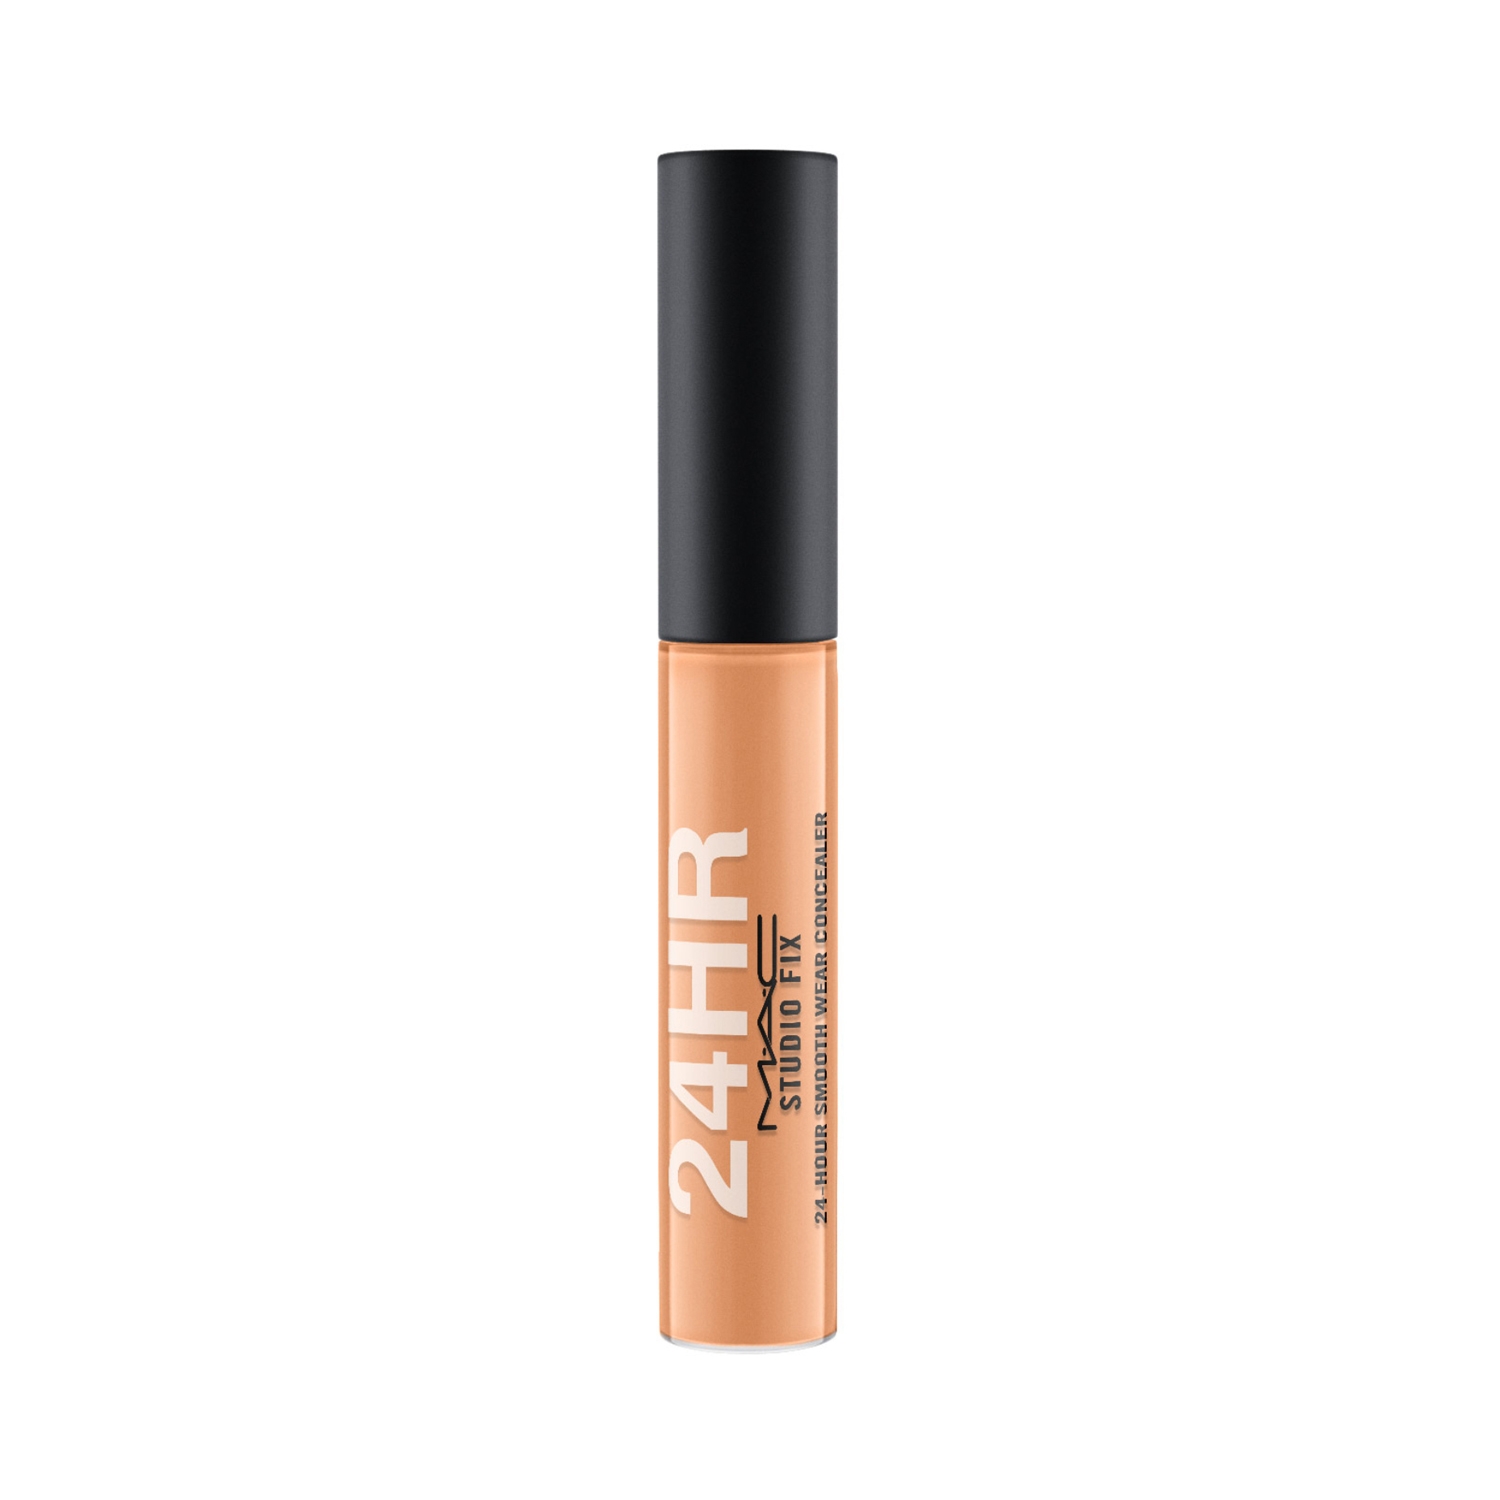 M.A.C | M.A.C Studio Fix 24-Hour Smooth Wear Concealer - NW40 (7ml)